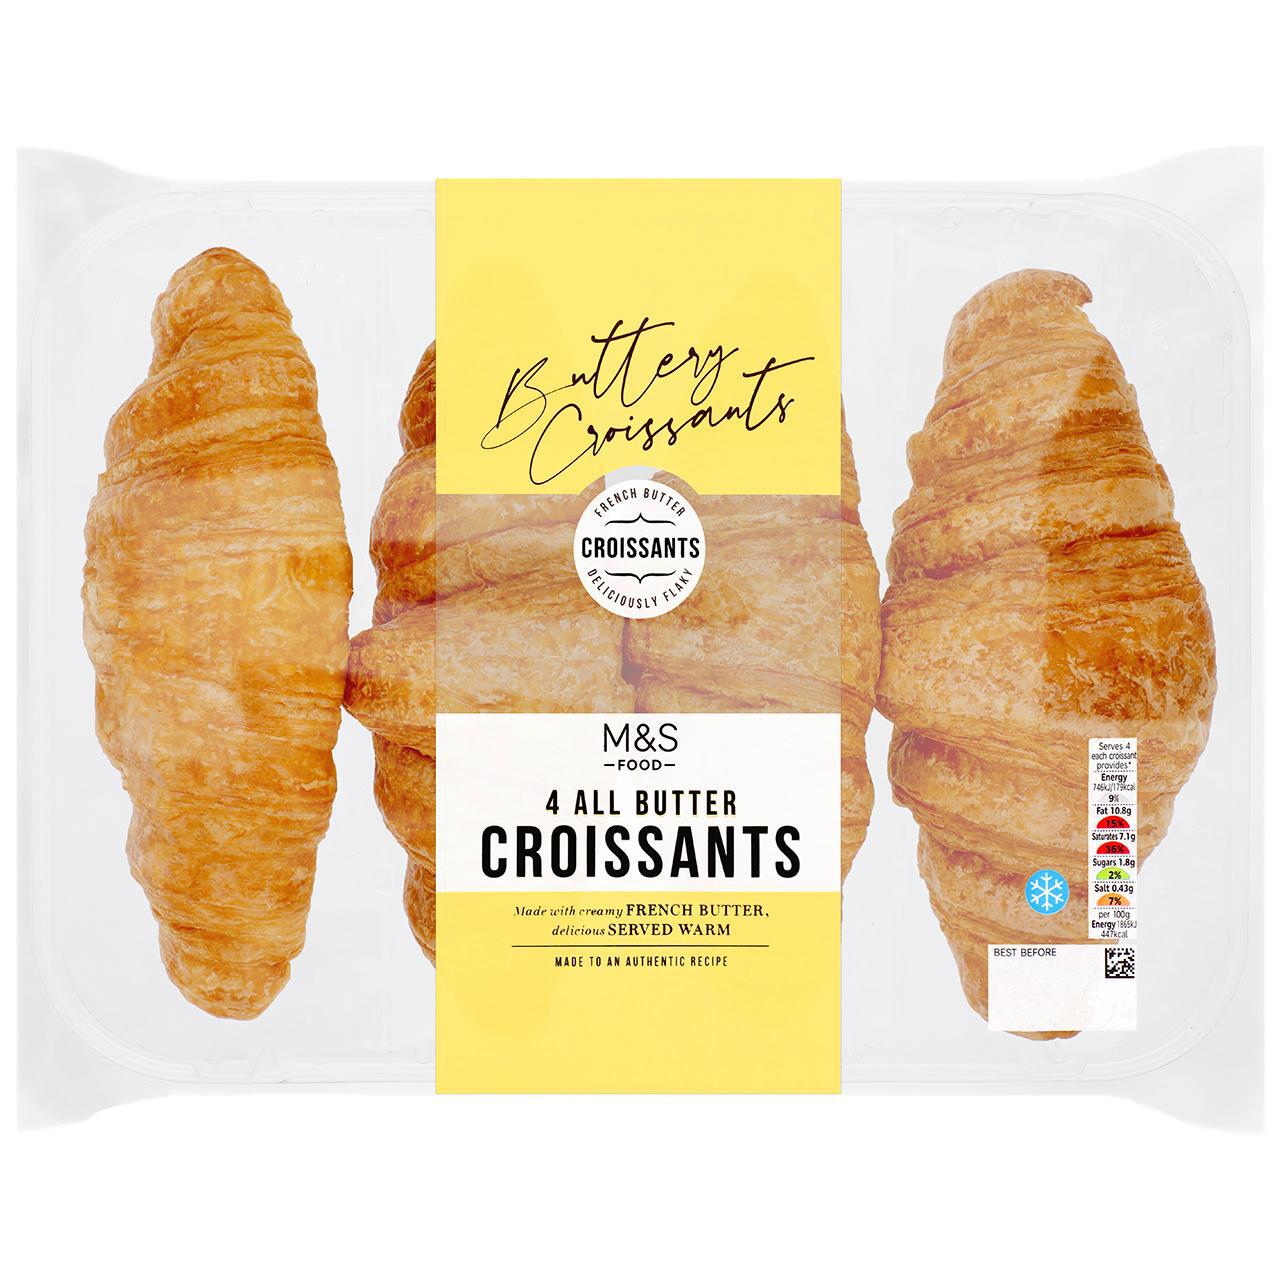 M&S 4 All Butter Croissants 4 per pack